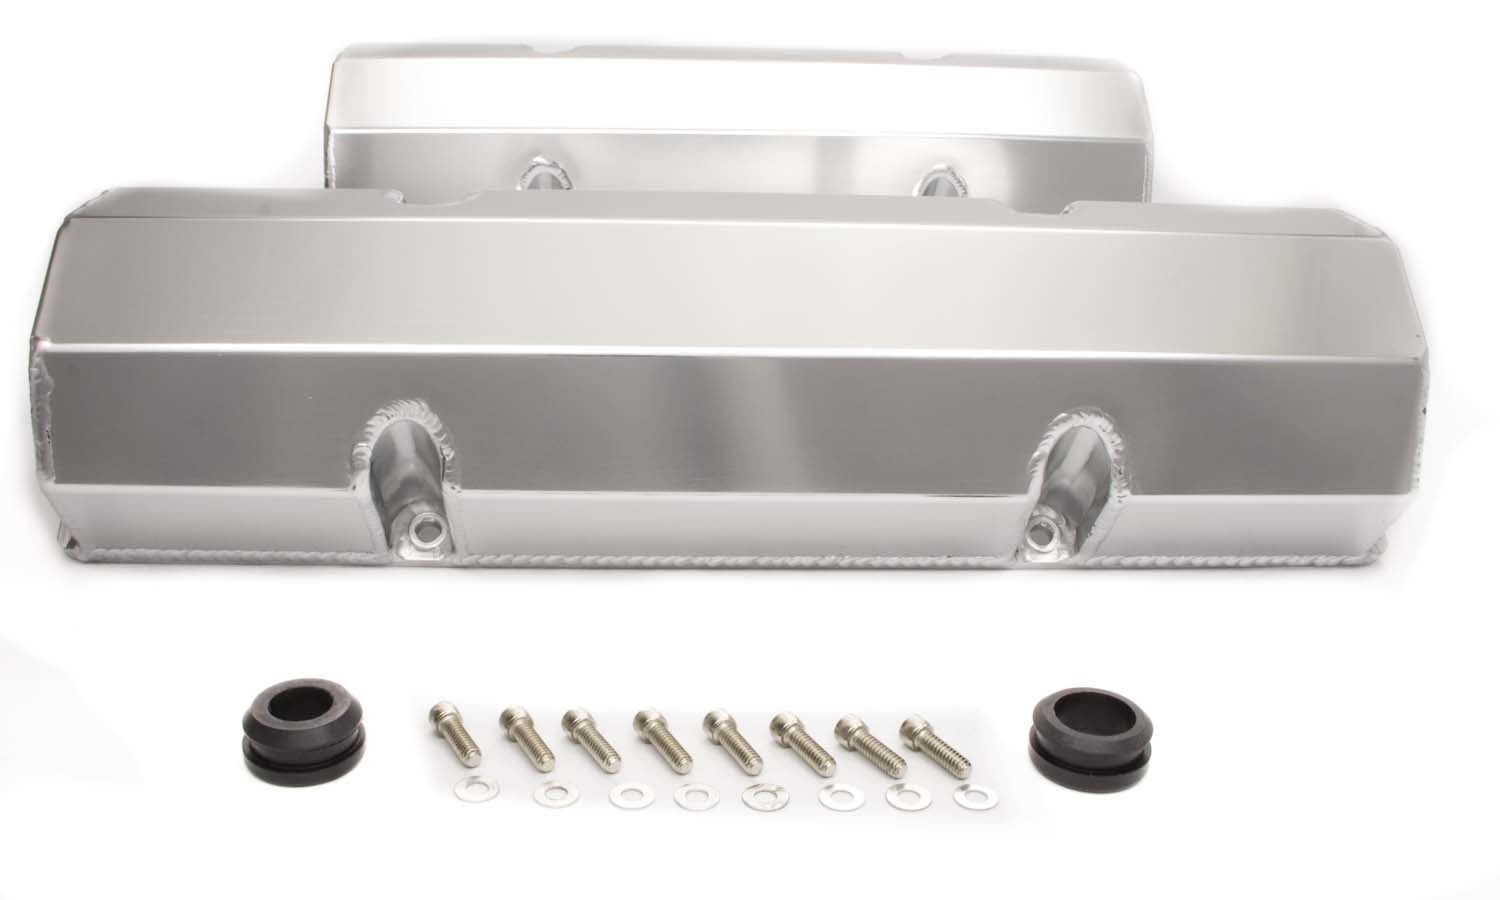 Canton Racing 65-200 Valve Cover for Small Block Chevy Fabricated Aluminum with Hardware 